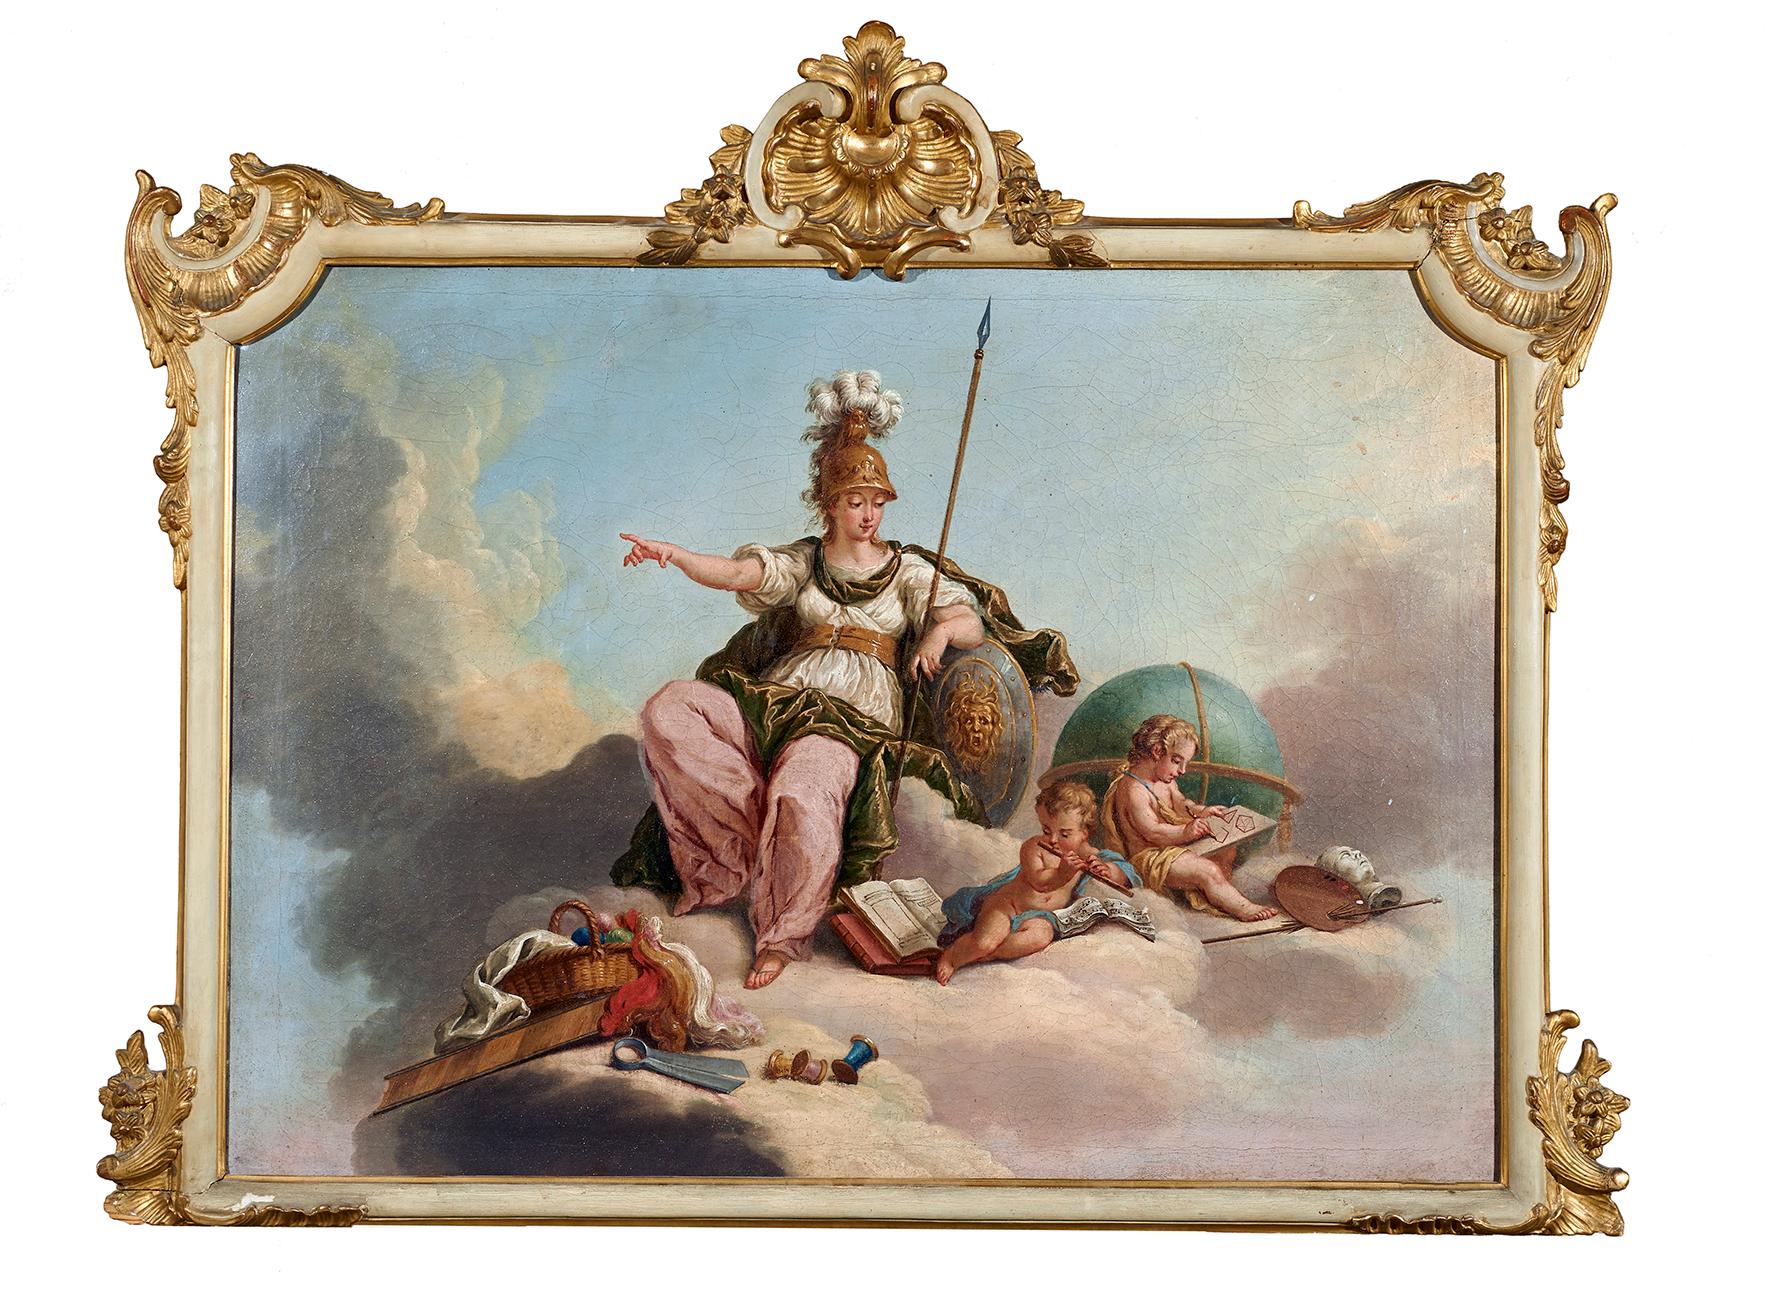 Painting oil on canvas measuring 68 x 92 cm without frame and 88 x 112 cm with frame depicting the allegory of the liberal arts painting, sculpture and music on one side with Minerva and her shield watching over a group of putti by the painter